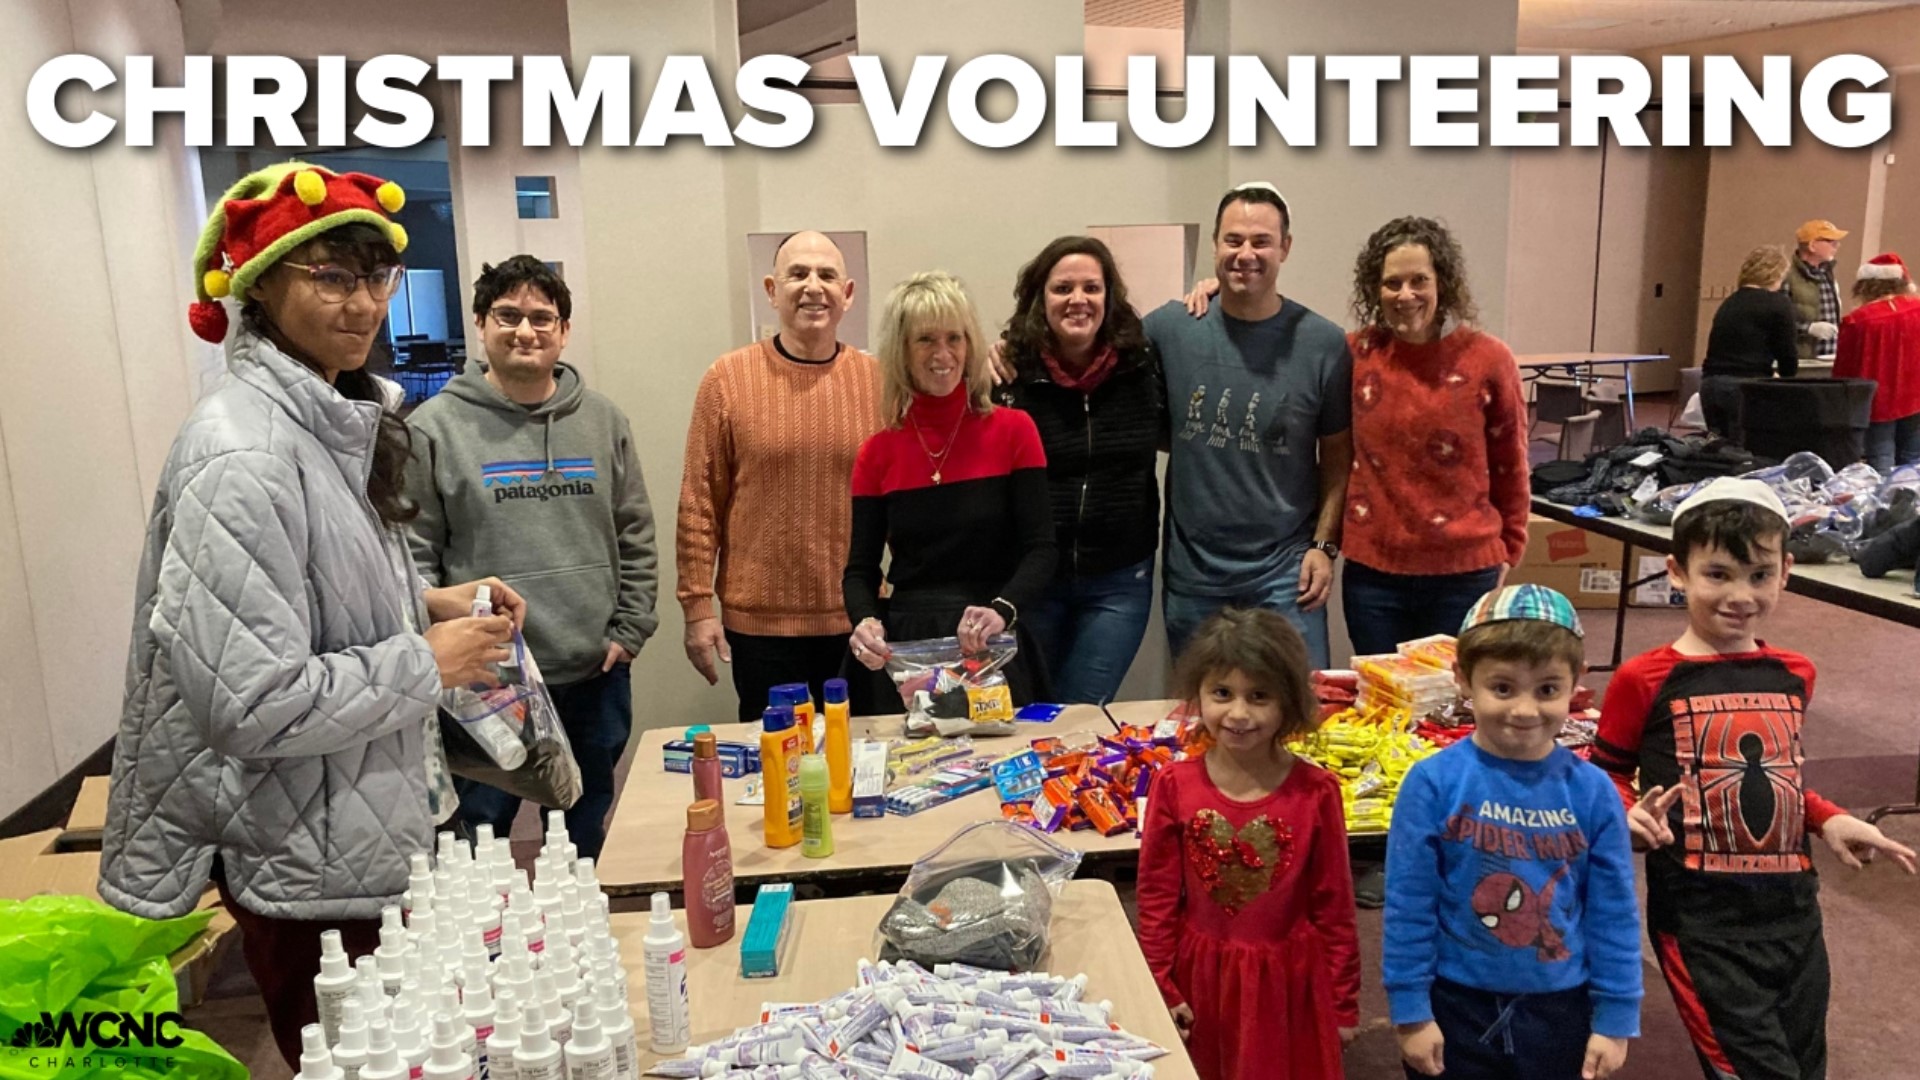 Volunteering for those in need on Christmas